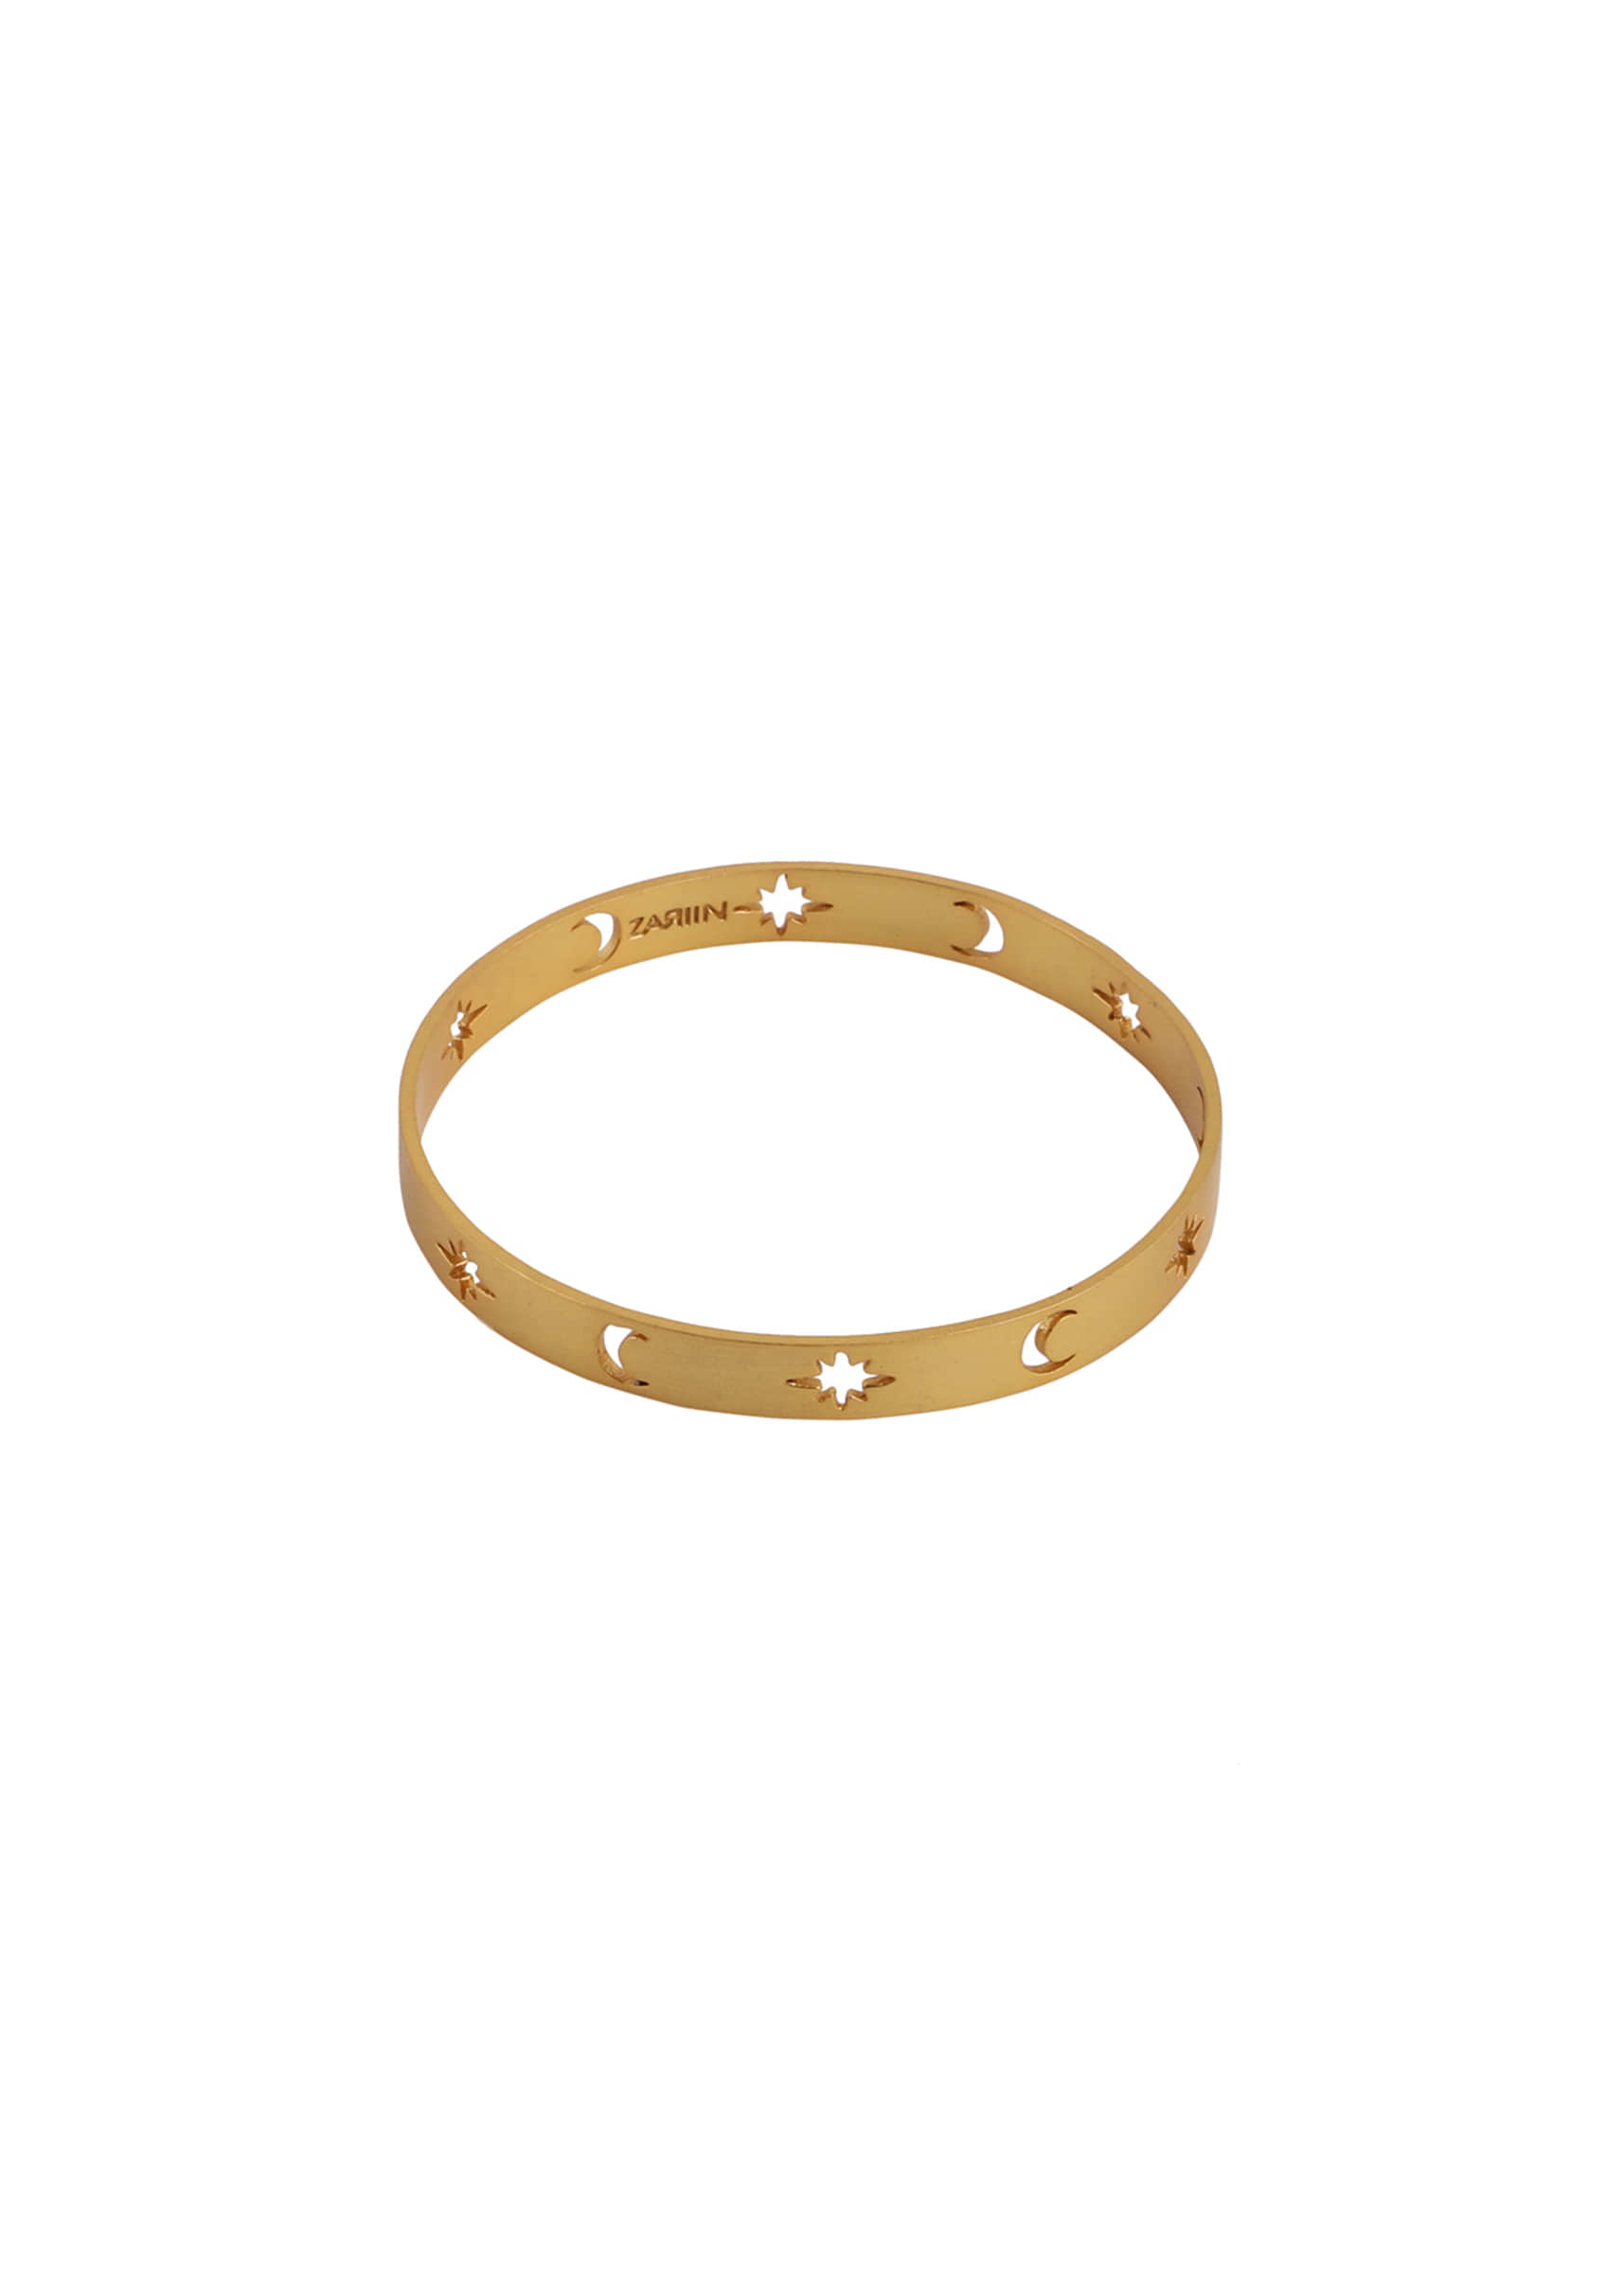 Gold Plated Bangle With Carved Stars And Moon Motifs By Zariin